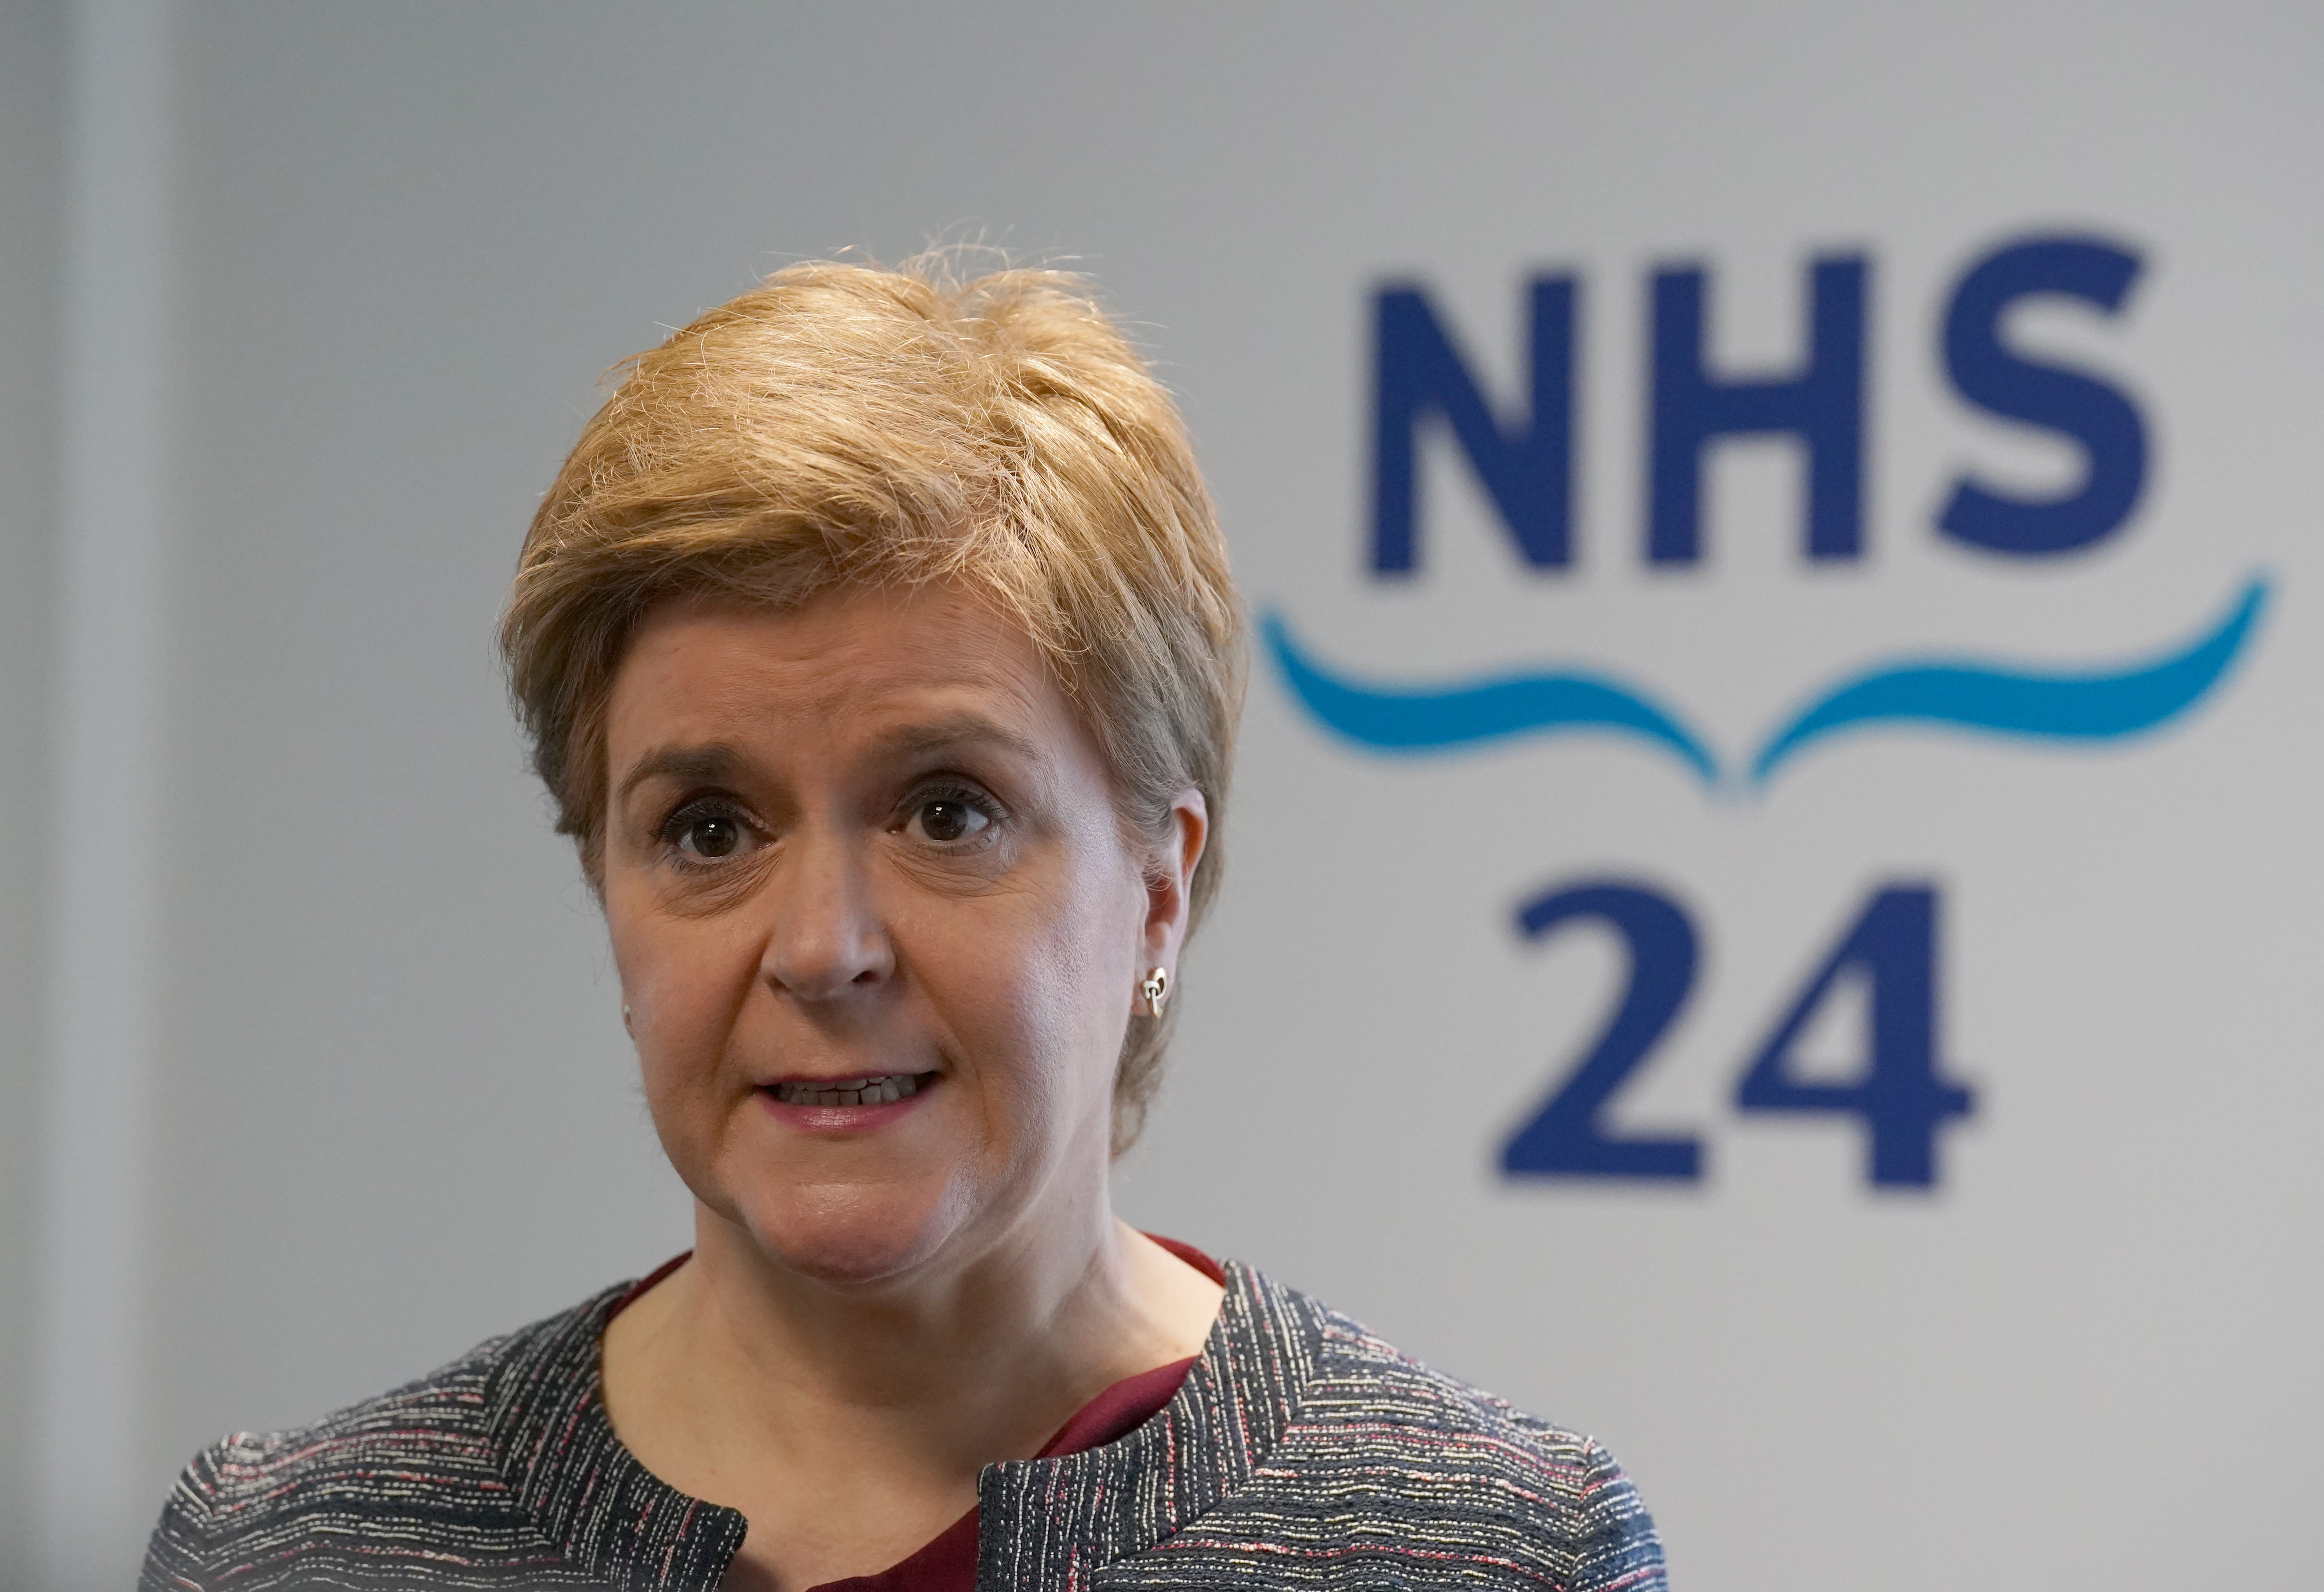 Scotland’s First Minister Nicola Sturgeon said she will do what she can to avoid healthcare strikes (Andrew Milligan/PA)